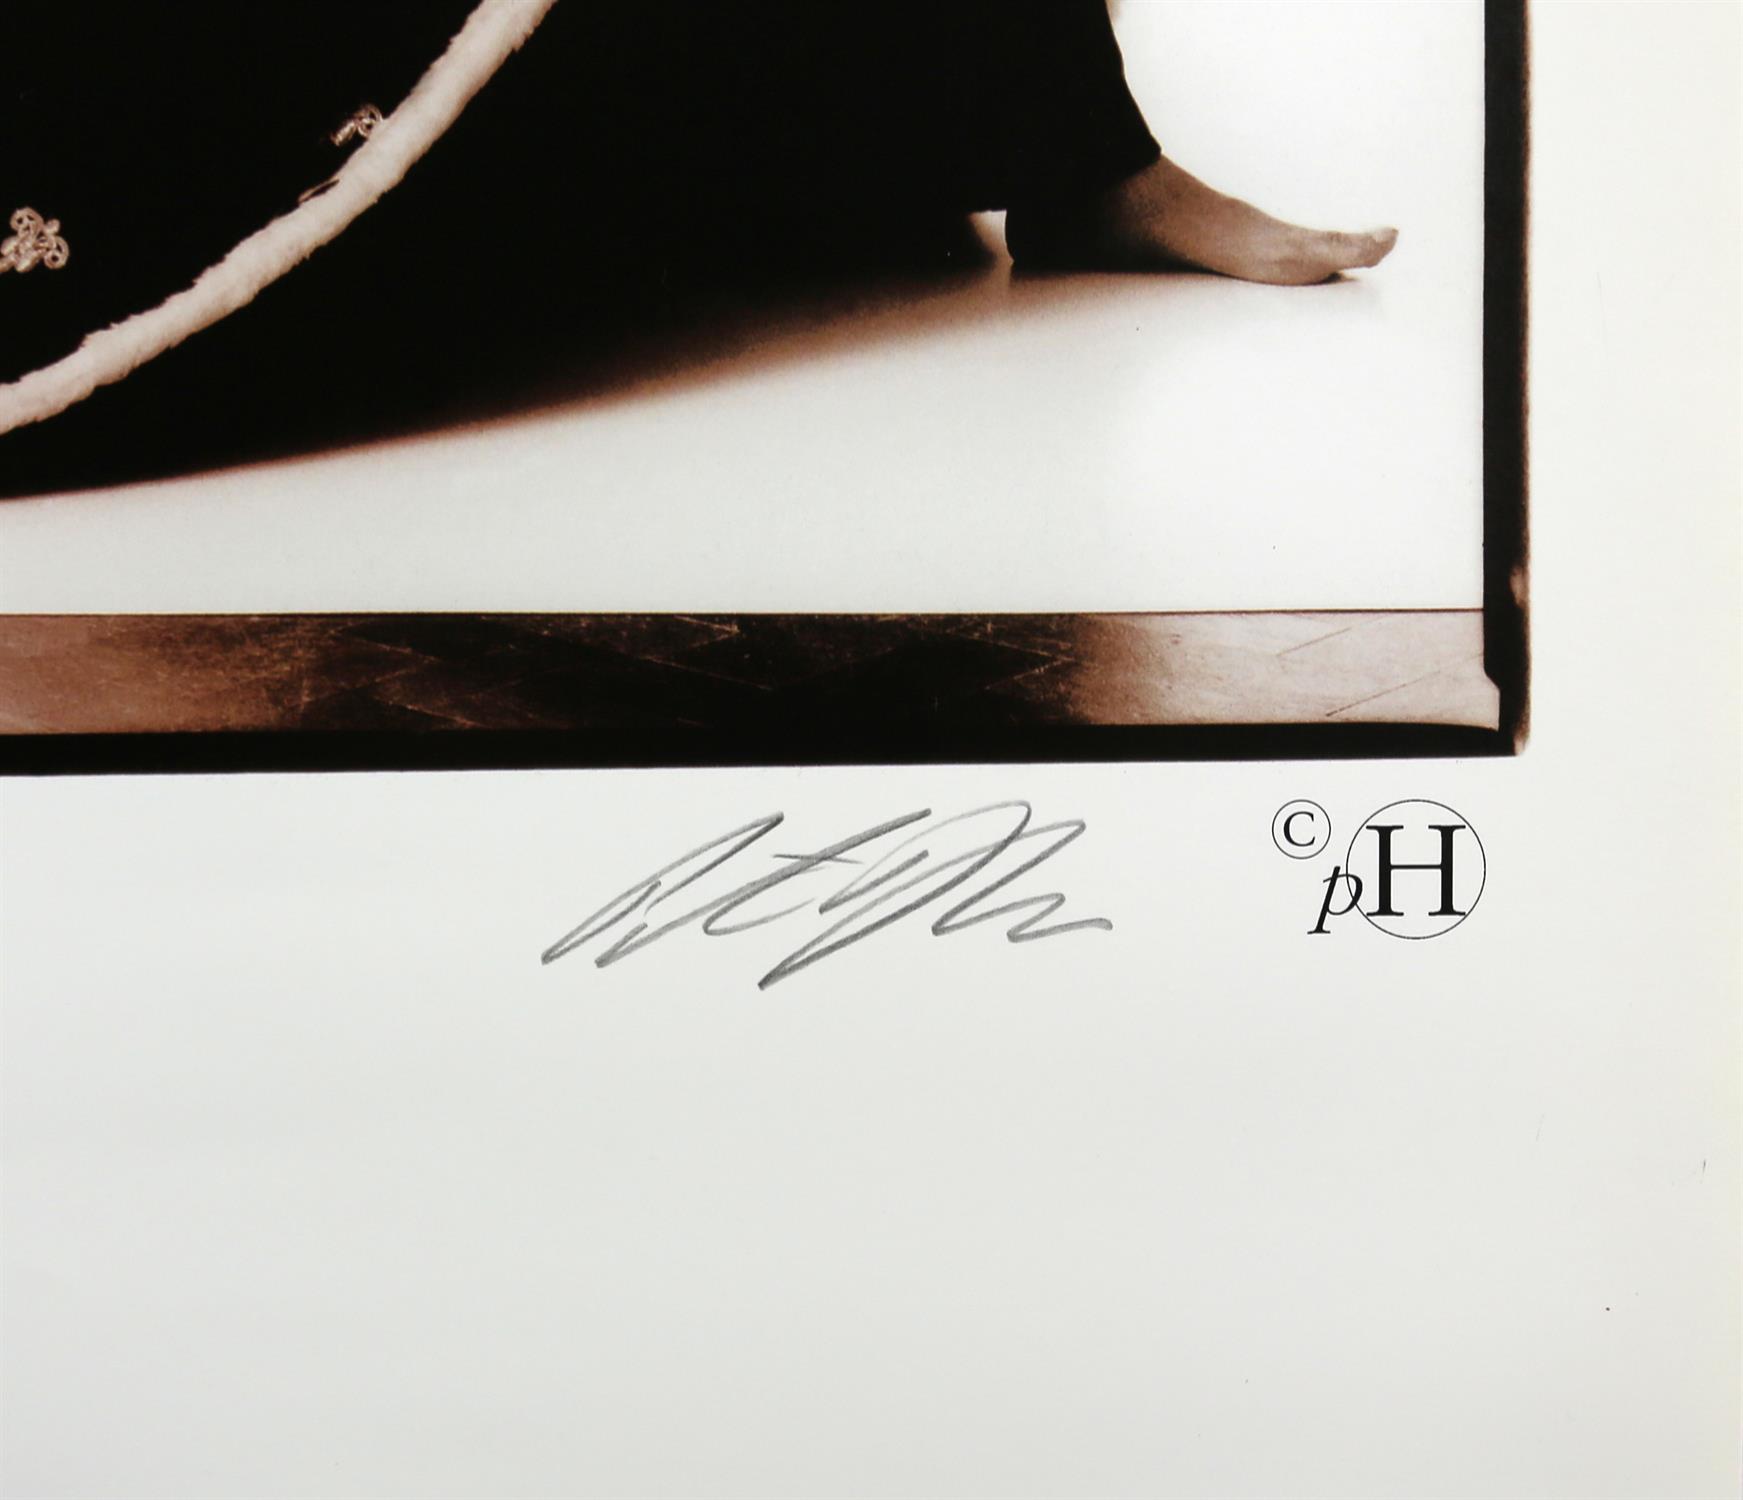 Queen - A2 Limited edition signed print of Freddie Mercury in his royal robes by photographer Peter - Image 5 of 6